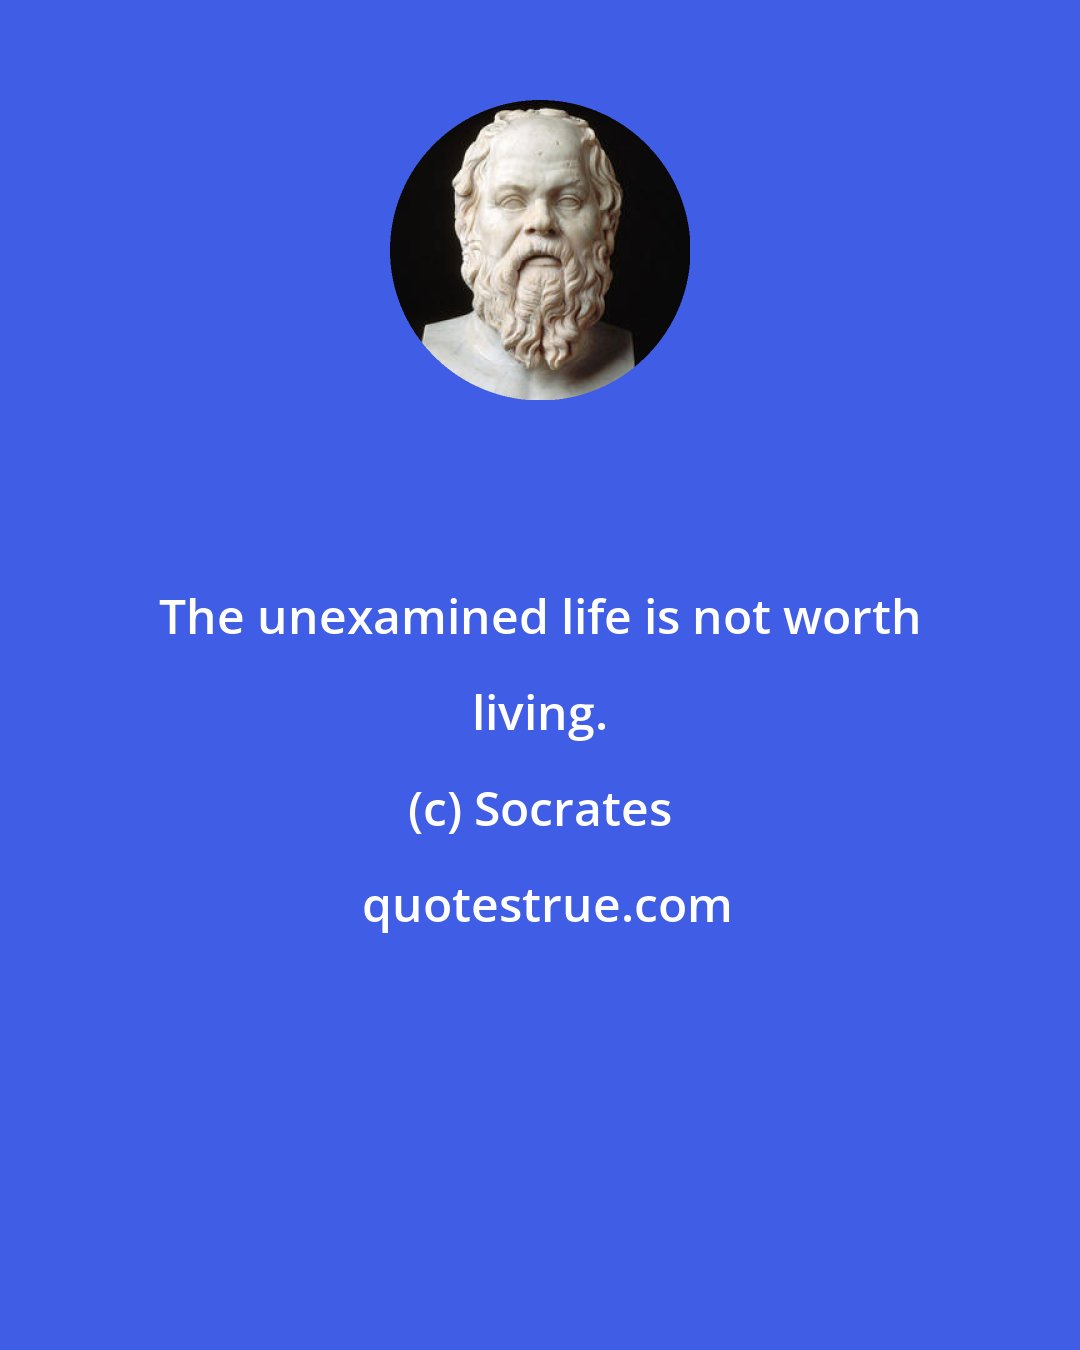 Socrates: The unexamined life is not worth living.